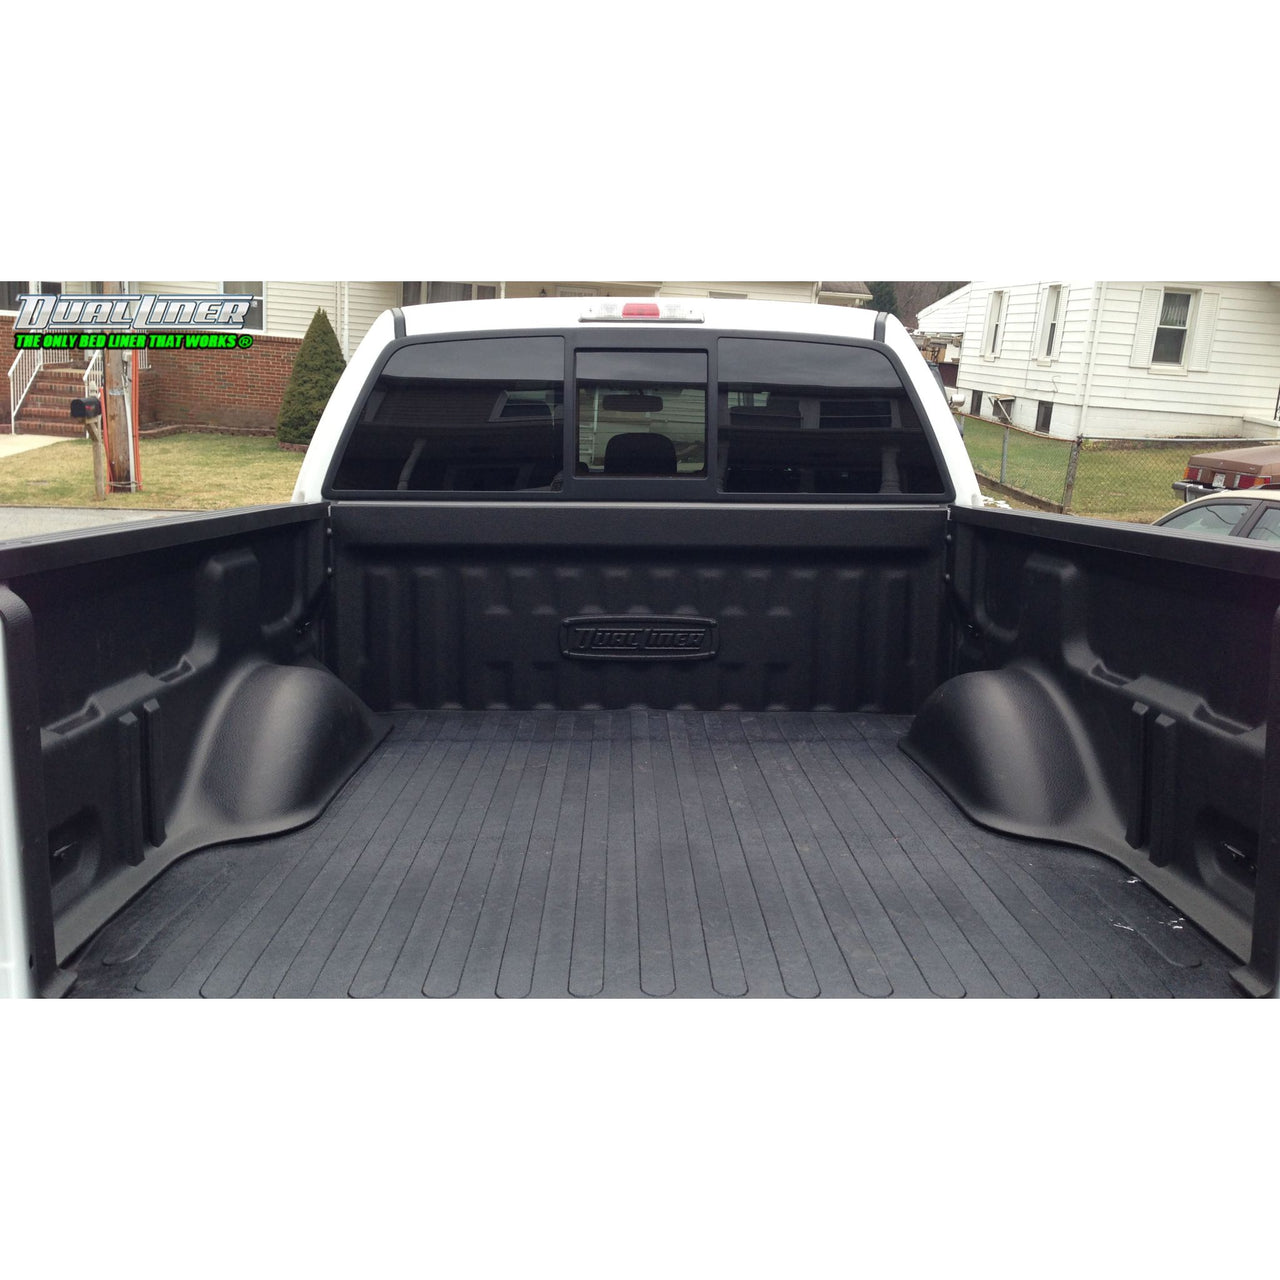 DualLiner 2021 to 2022 F-150 (WITH LED Light Bar & Tailgate Work Surface) - Long 8' Bed